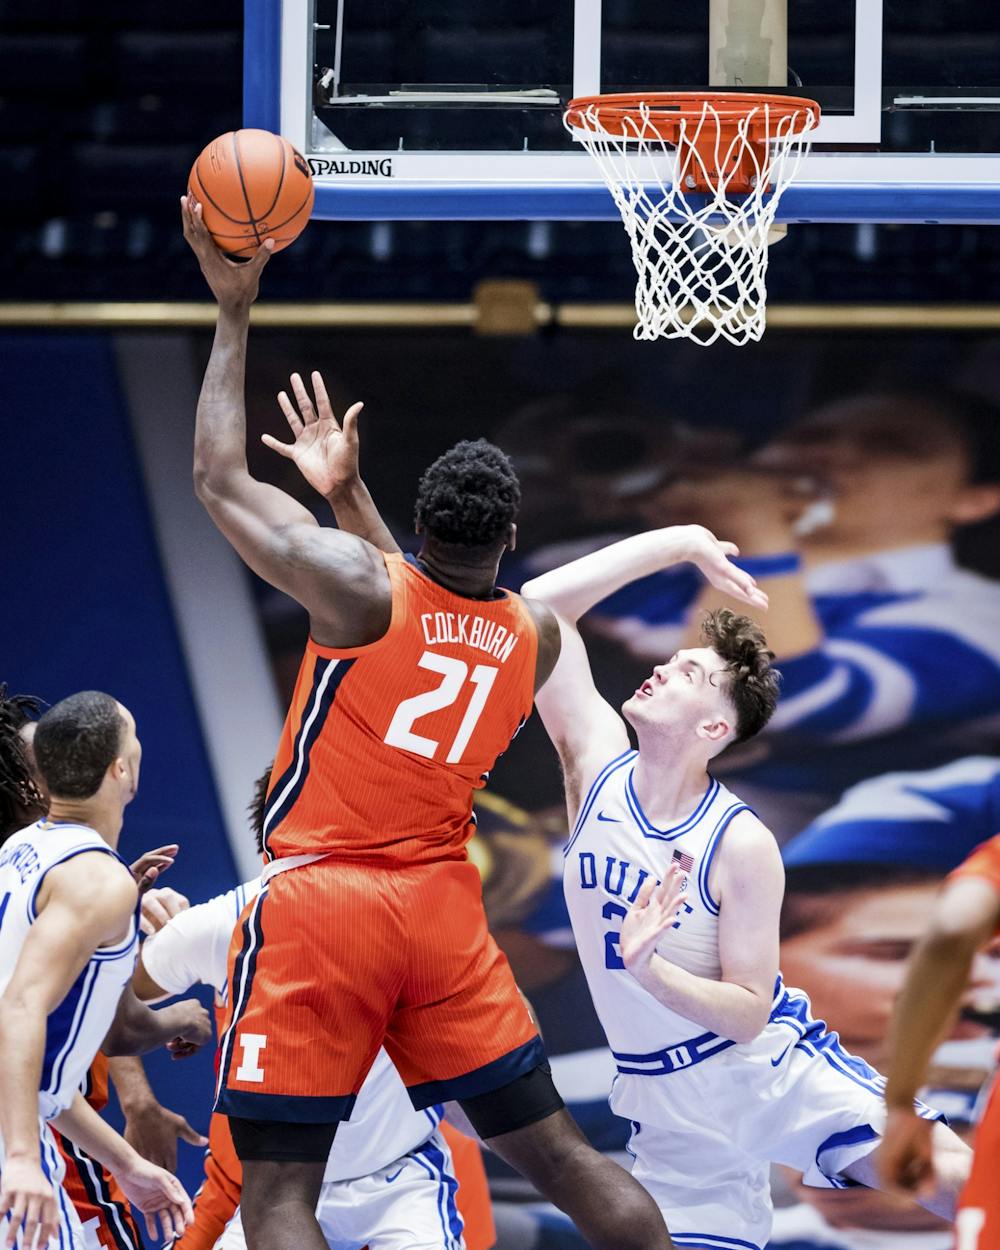 In order for Duke to turn its season around, the Blue Devils need to start with establishing a defensive mindset.